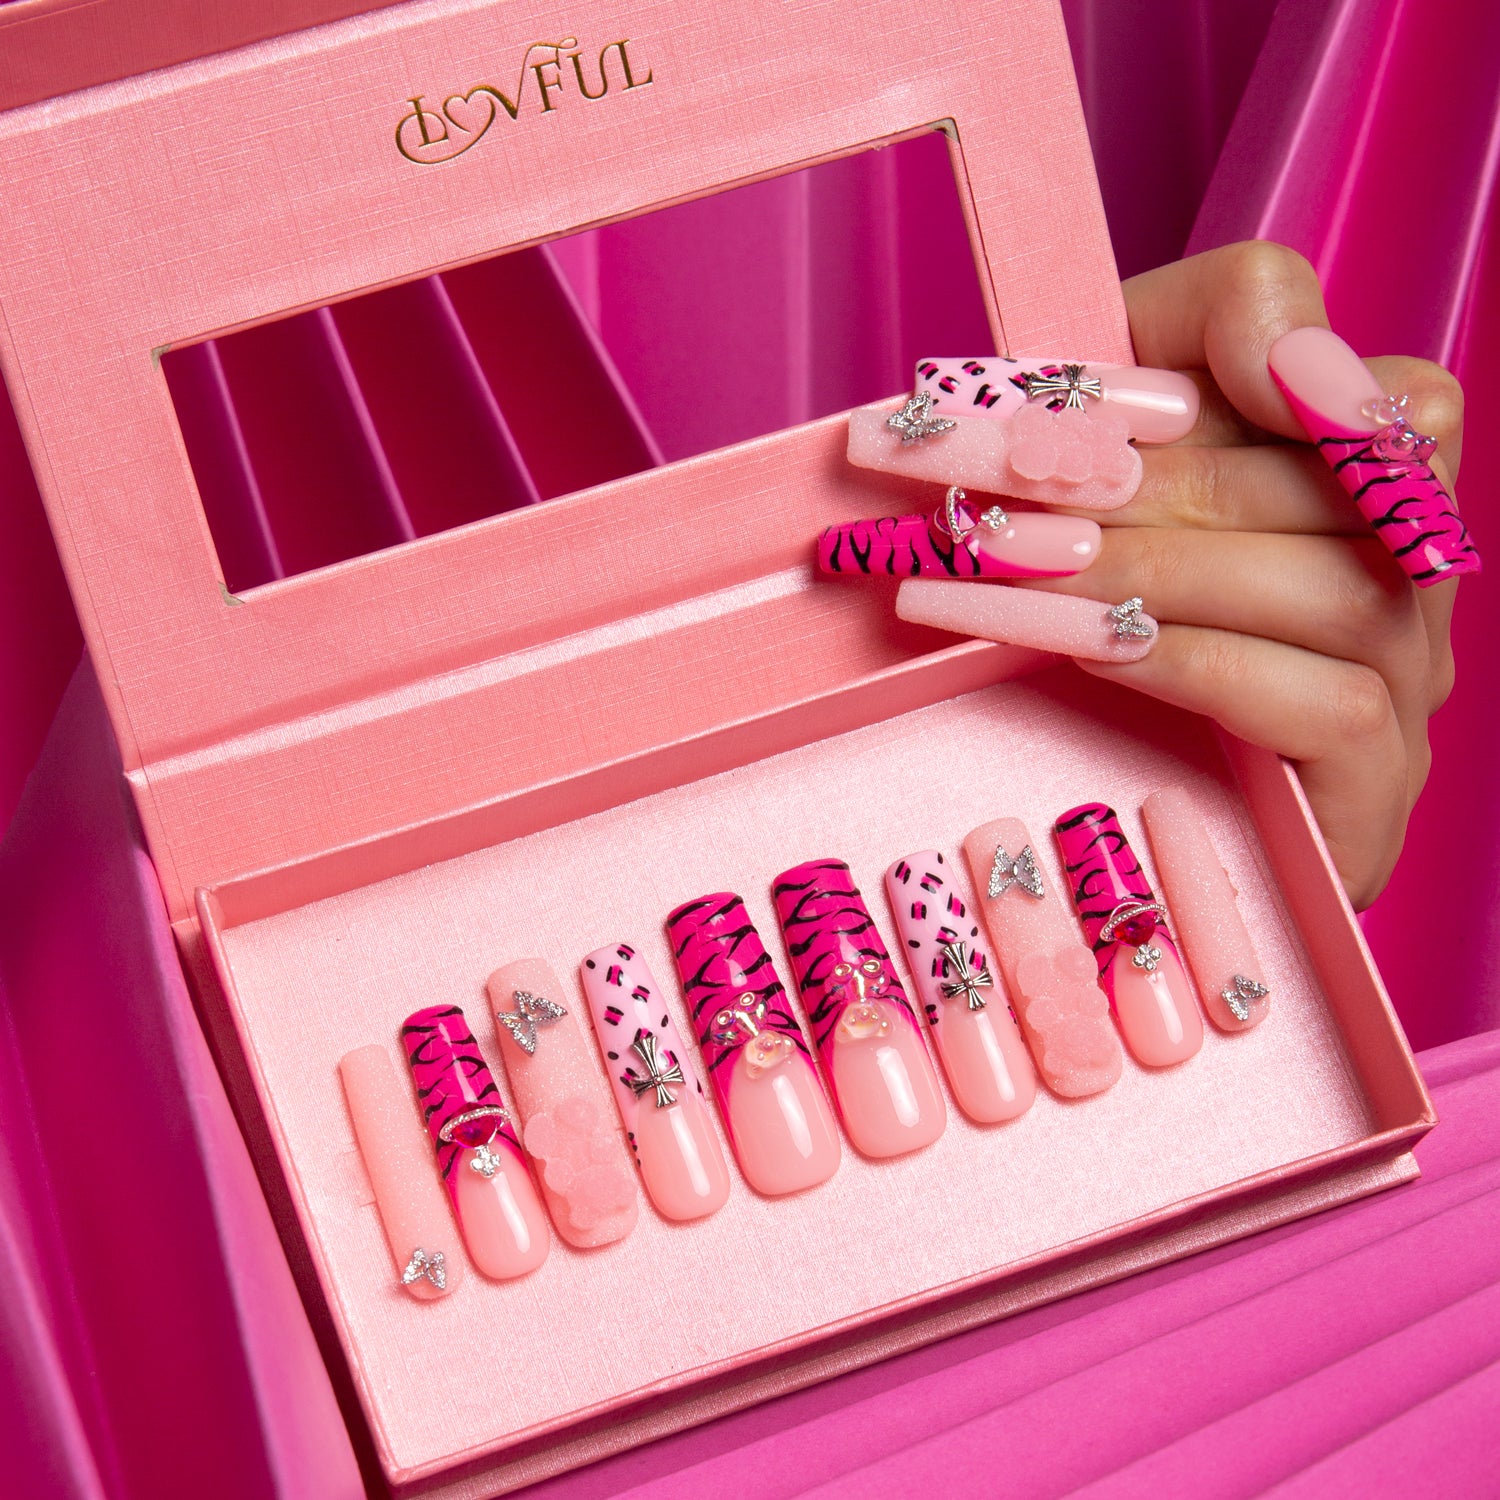 Safari Love press-on nails in pink box, with hot pink French tips, leopard prints, lips and butterfly designs, displayed with a hand holding several nails.